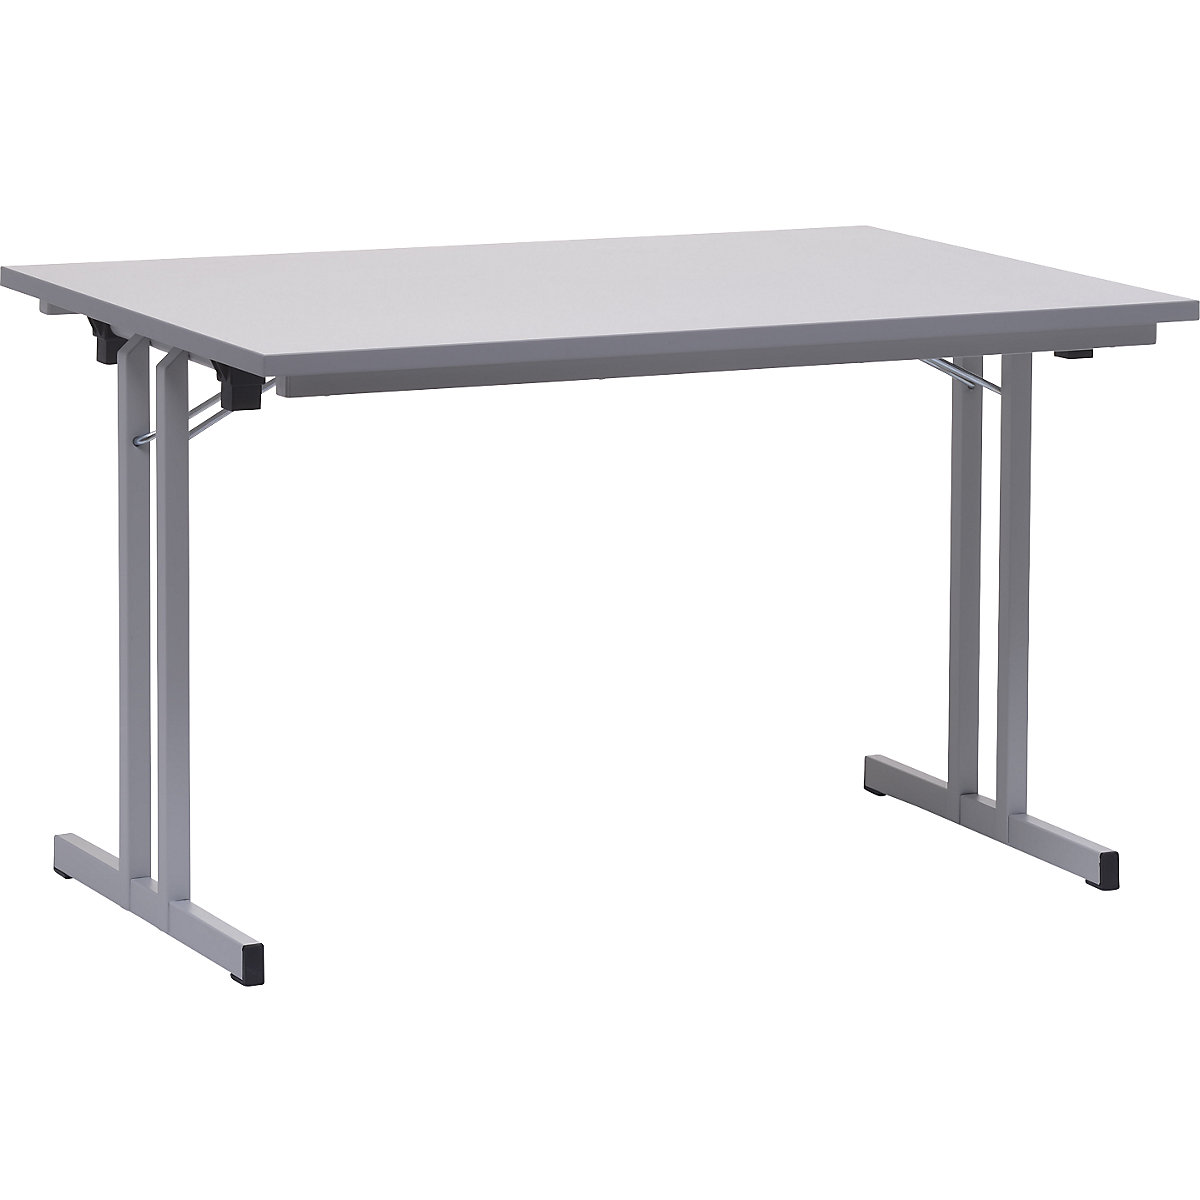 Folding table, with extra thick tabletop